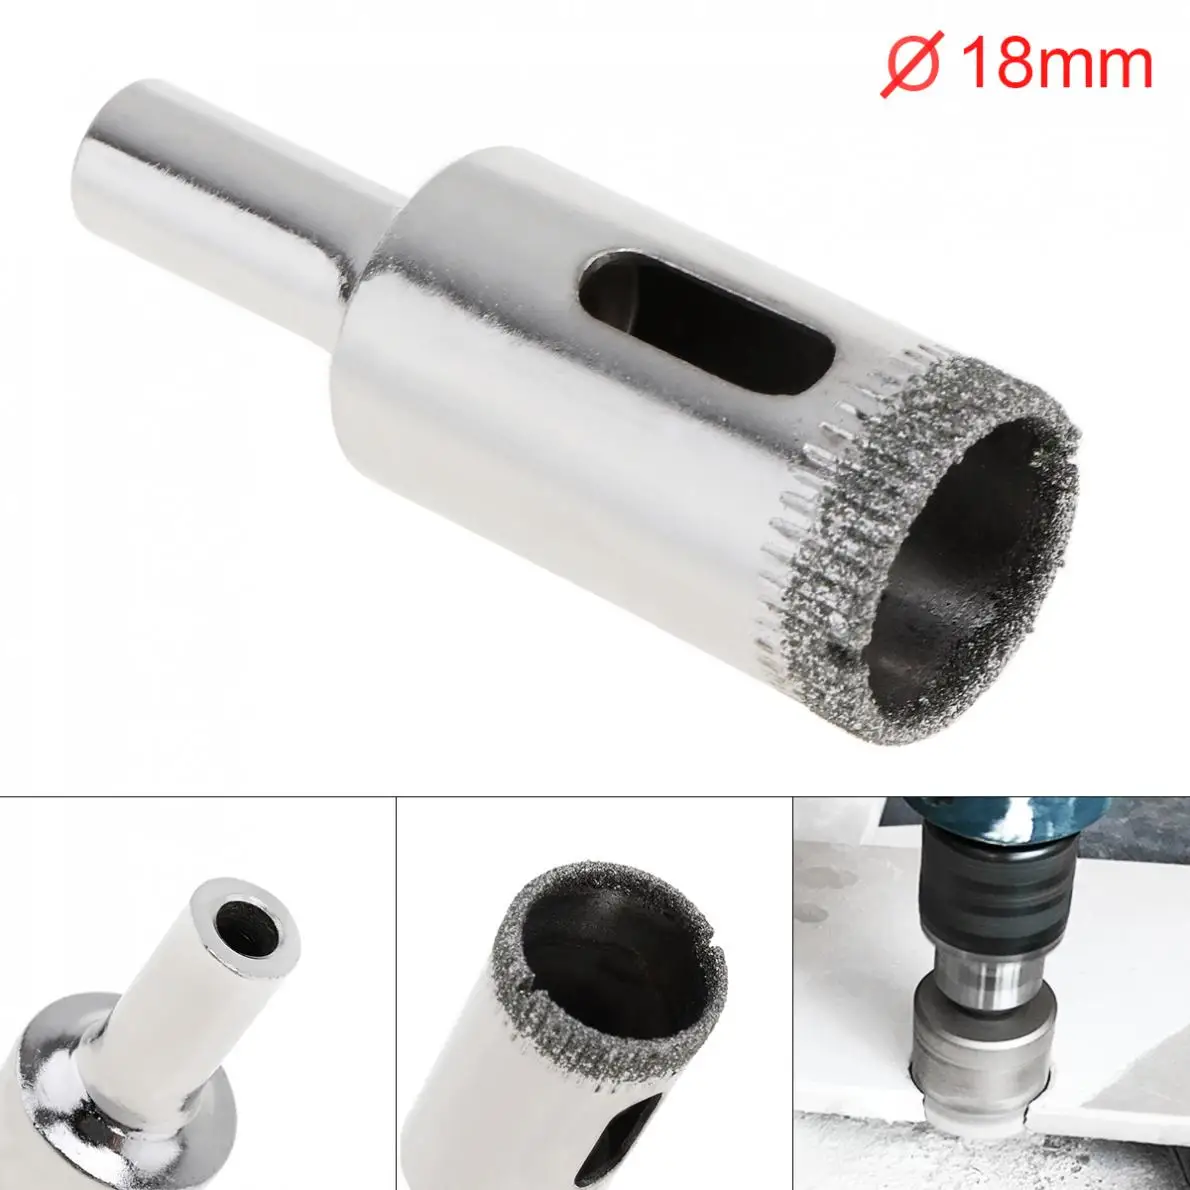 1pc 18mm Diamond Coated Core Hole Saw Drill Bit Set Tools Glass Drill Hole Opener for Tiles Glass Ceramic